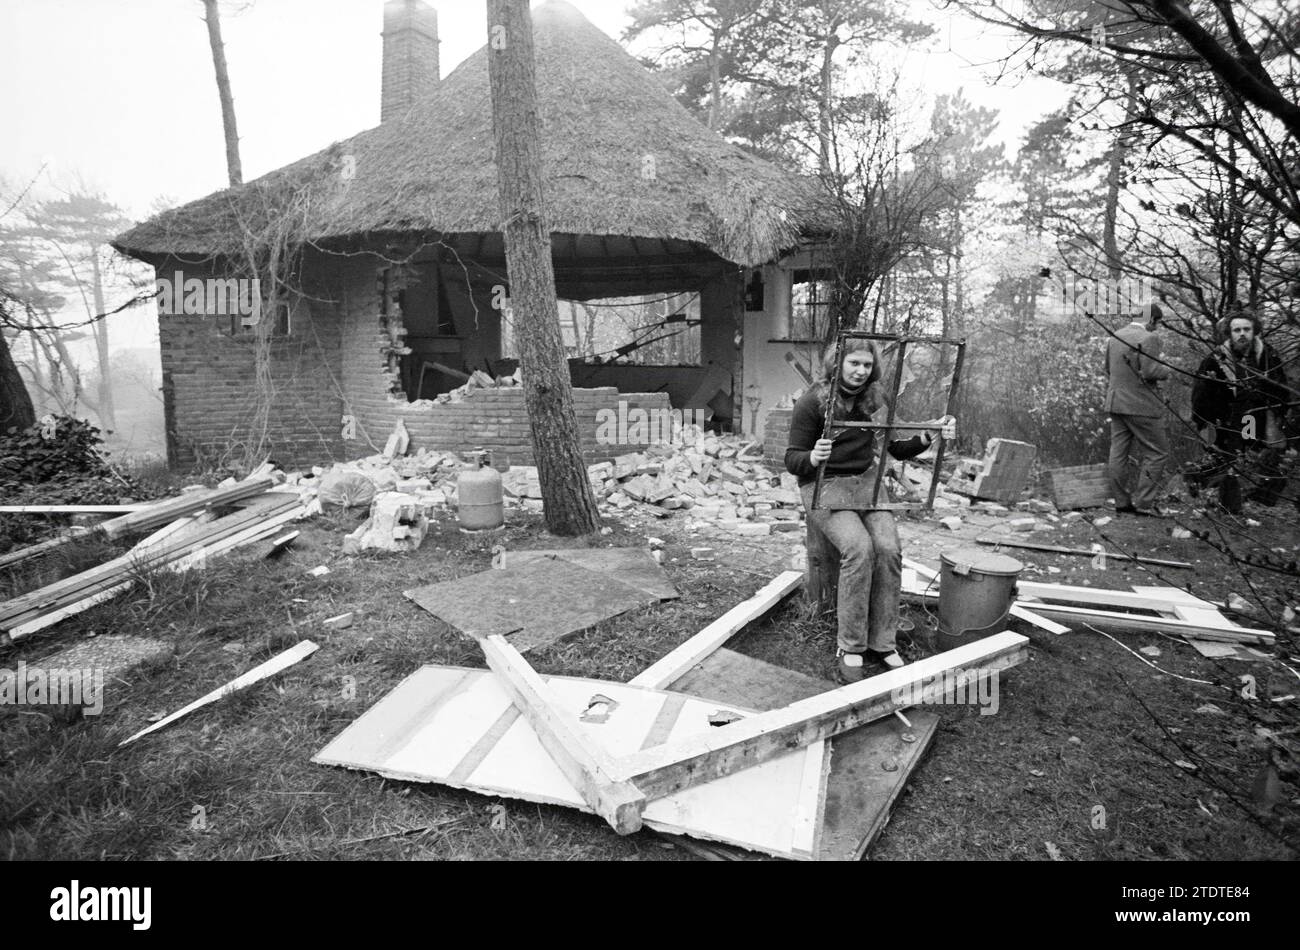 A partly demolished house, Whizgle News from the Past, Tailored for the Future. Explore historical narratives, Dutch The Netherlands agency image with a modern perspective, bridging the gap between yesterday's events and tomorrow's insights. A timeless journey shaping the stories that shape our future Stock Photo